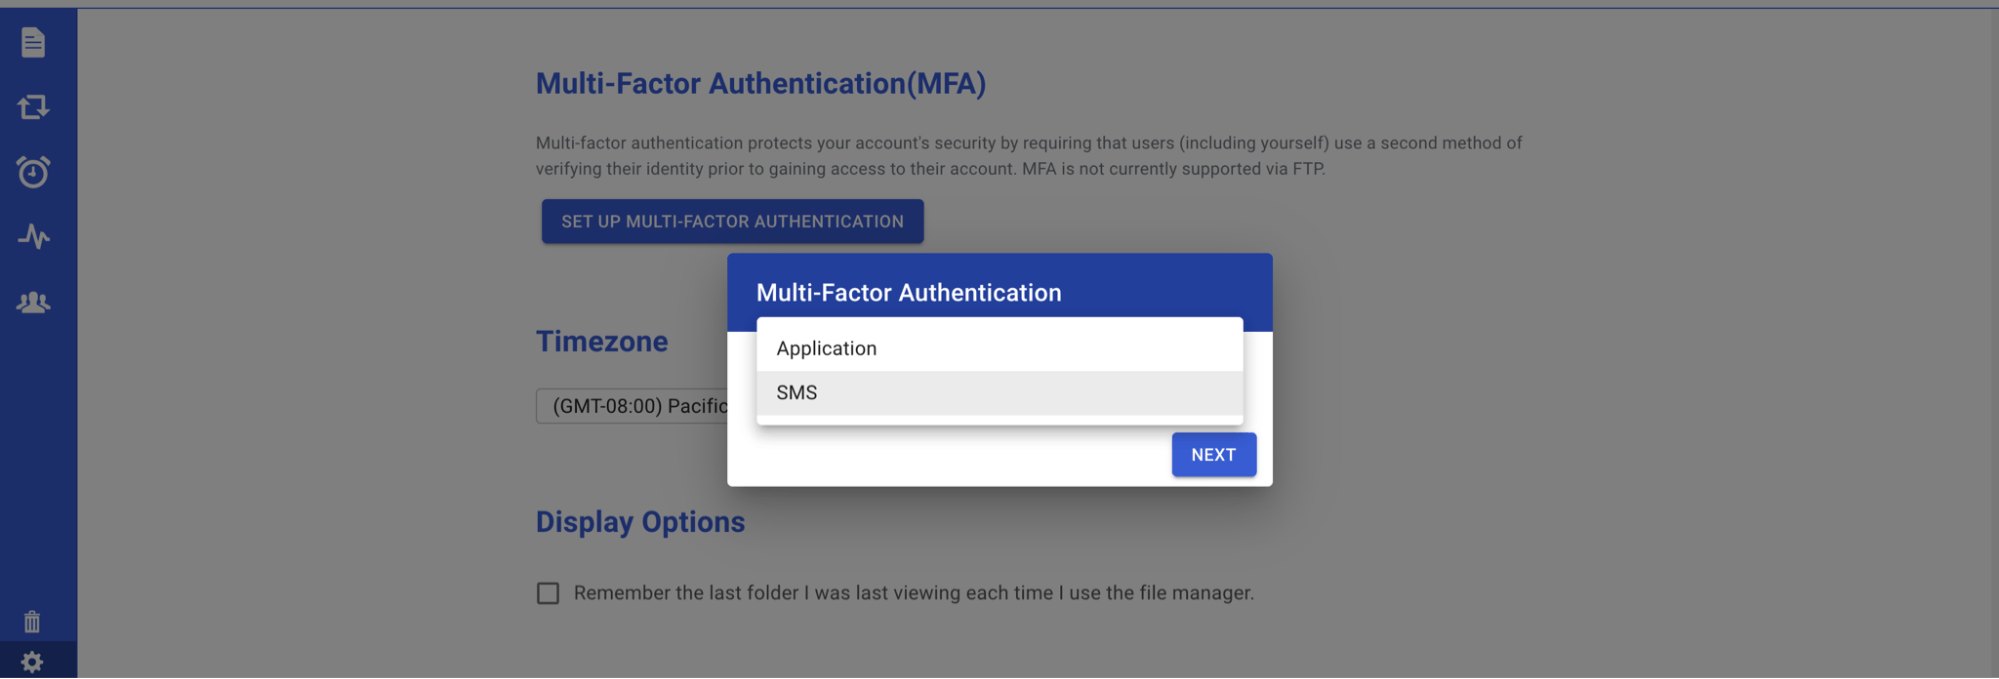 Multi-factor authentication available.